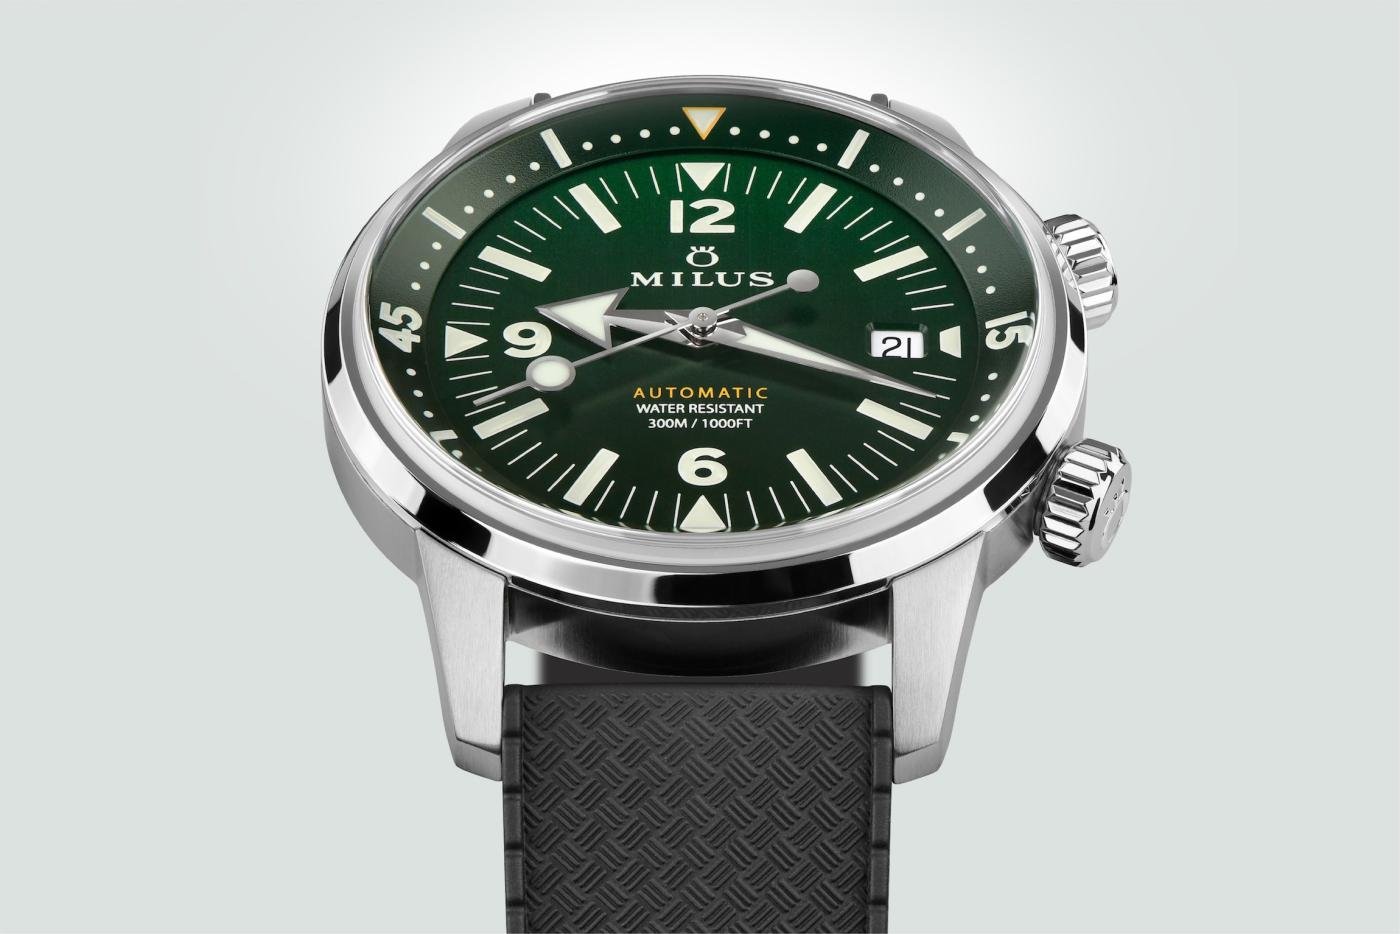 Introducing Milus Archimèdes Wild Green